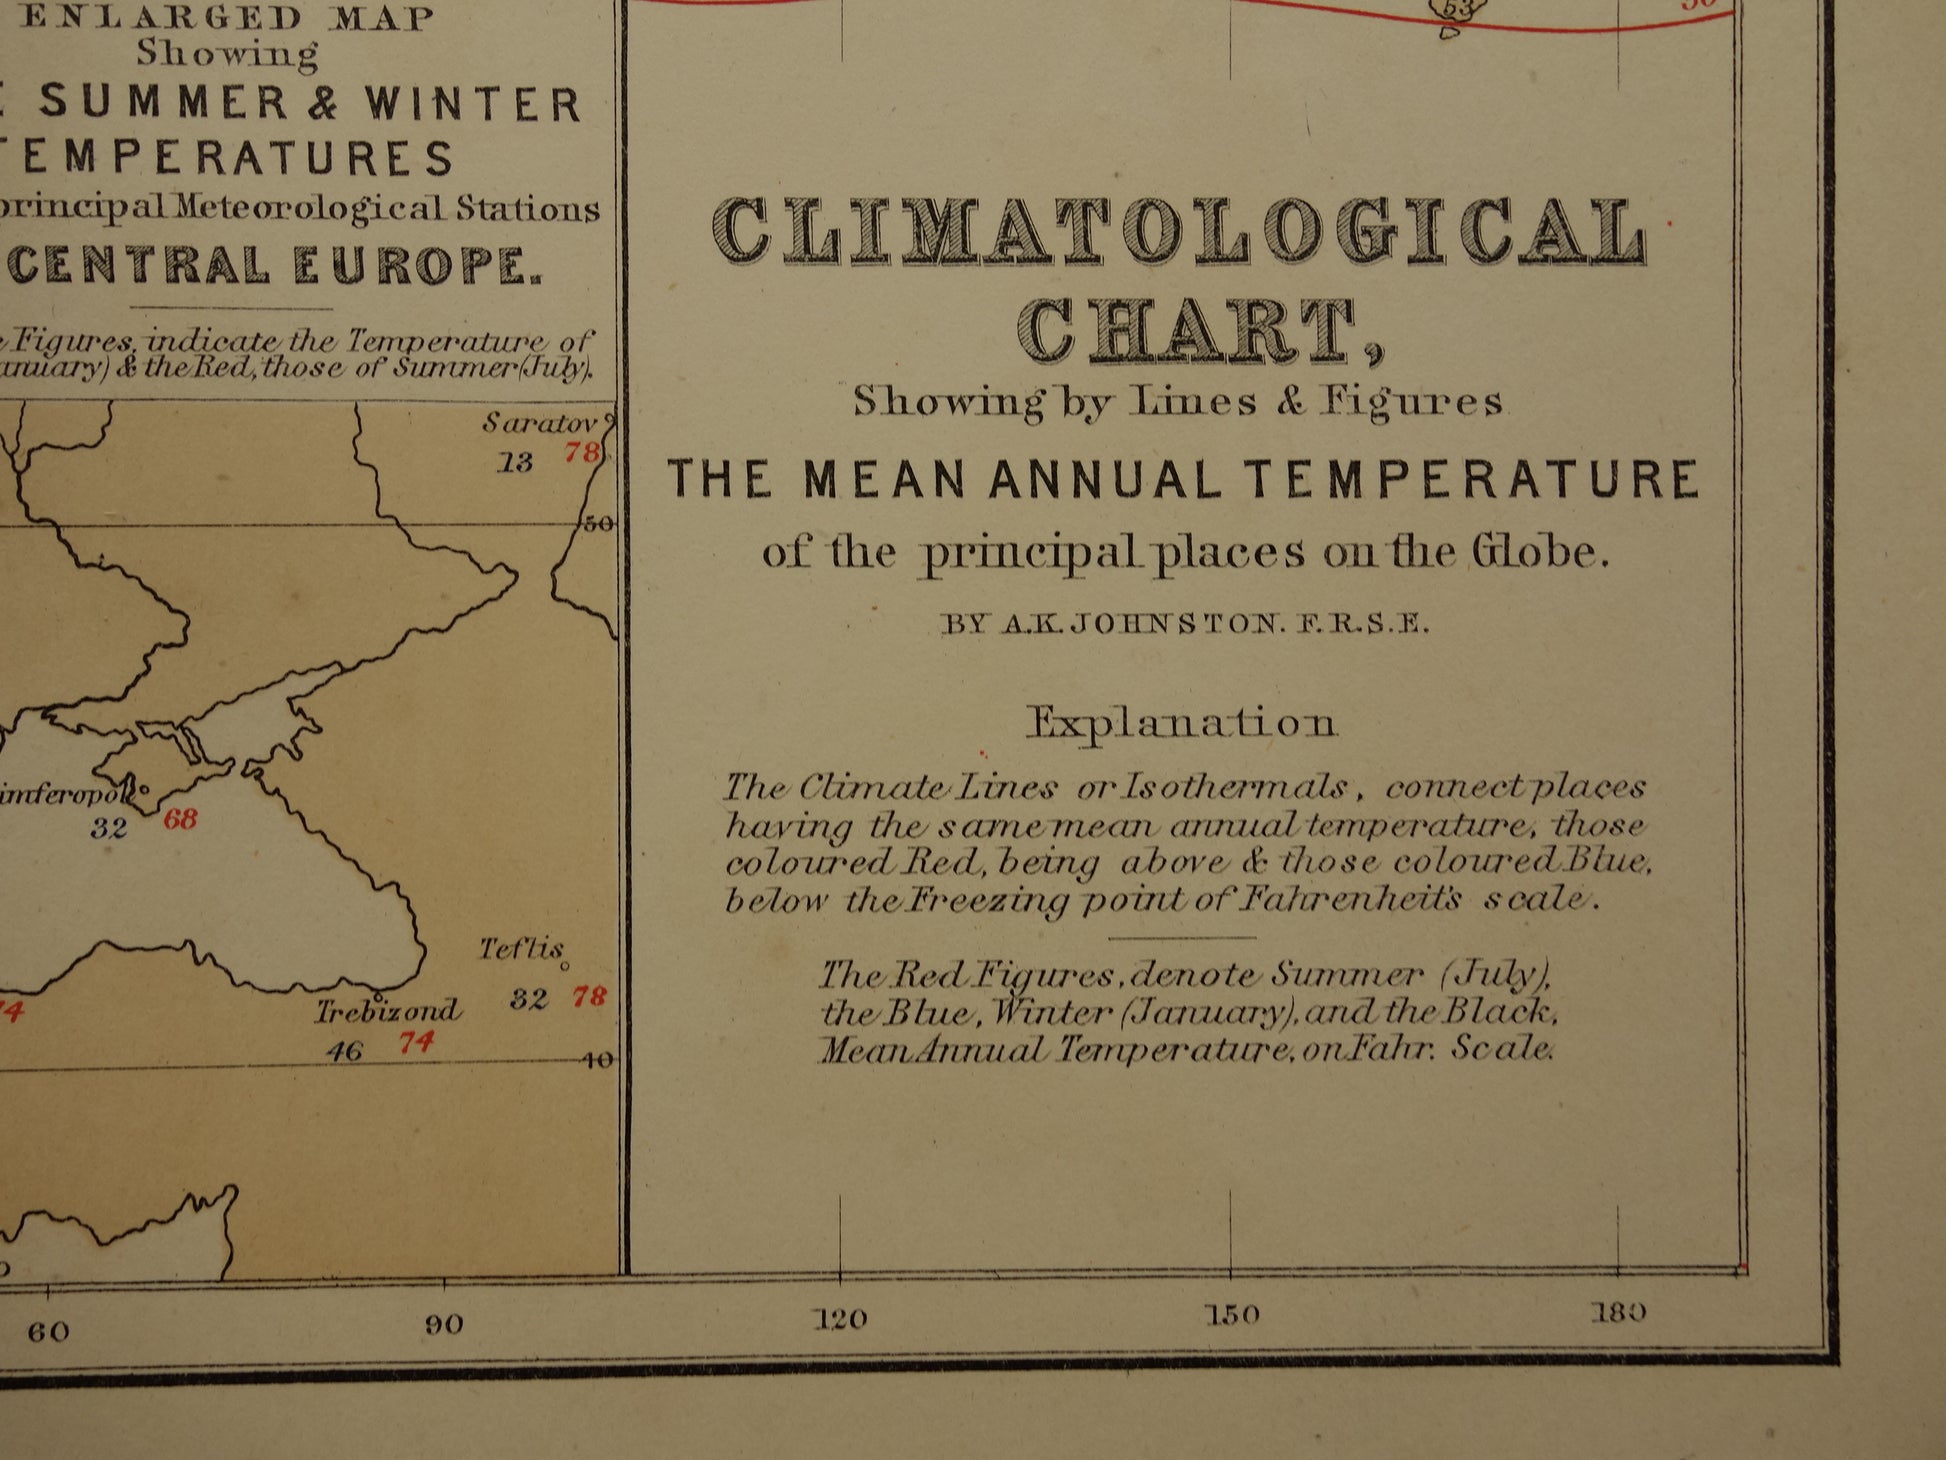 16 Climatological chart showing by lines and figures the mean annual temperature